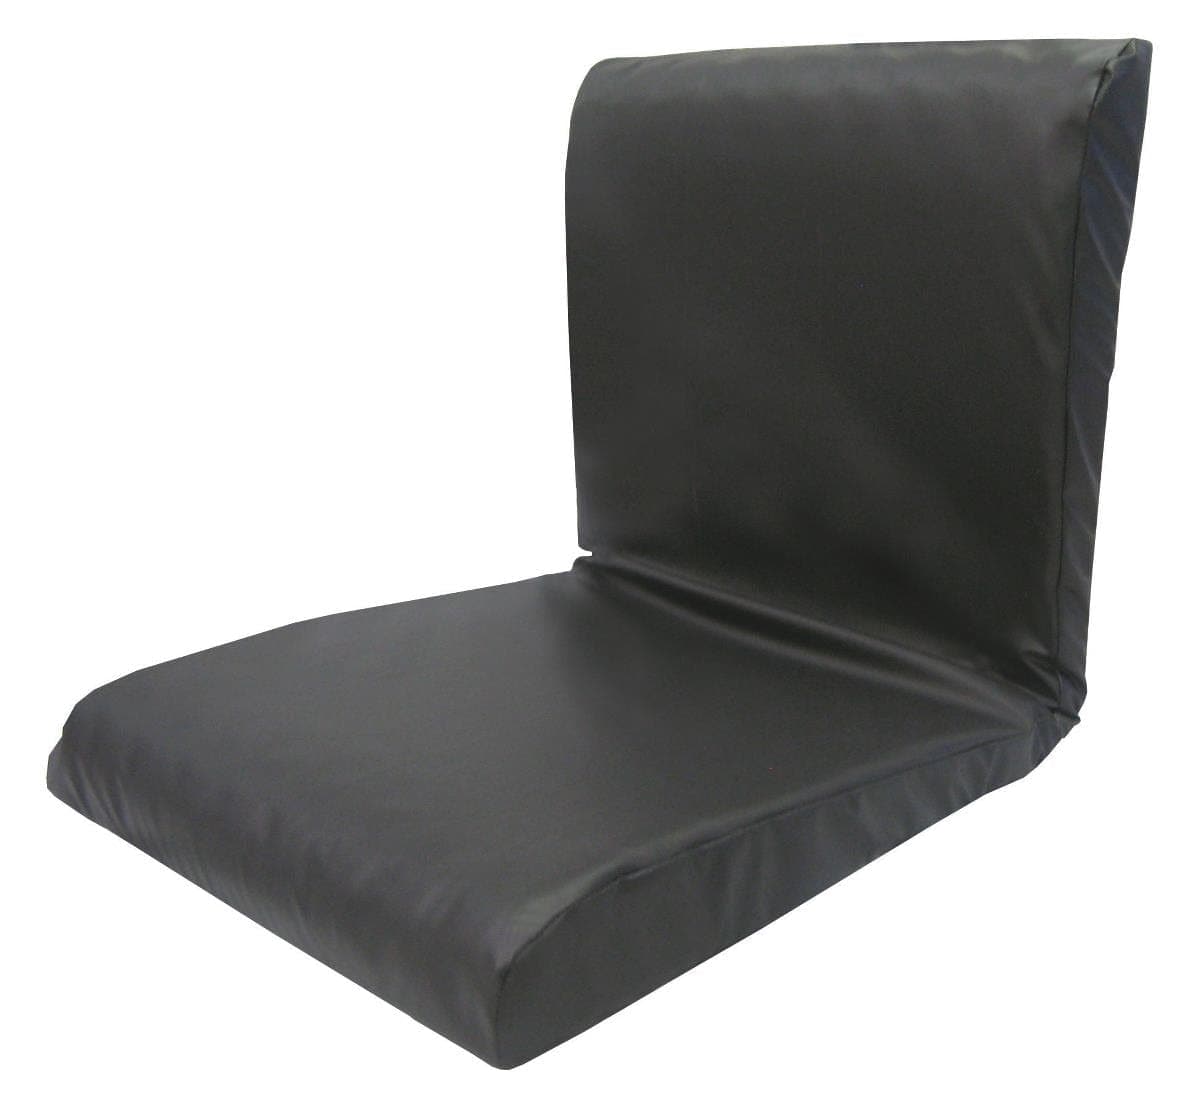 Medline 18"X16" Medline Therapeutic Foam Seat and Back Cushion